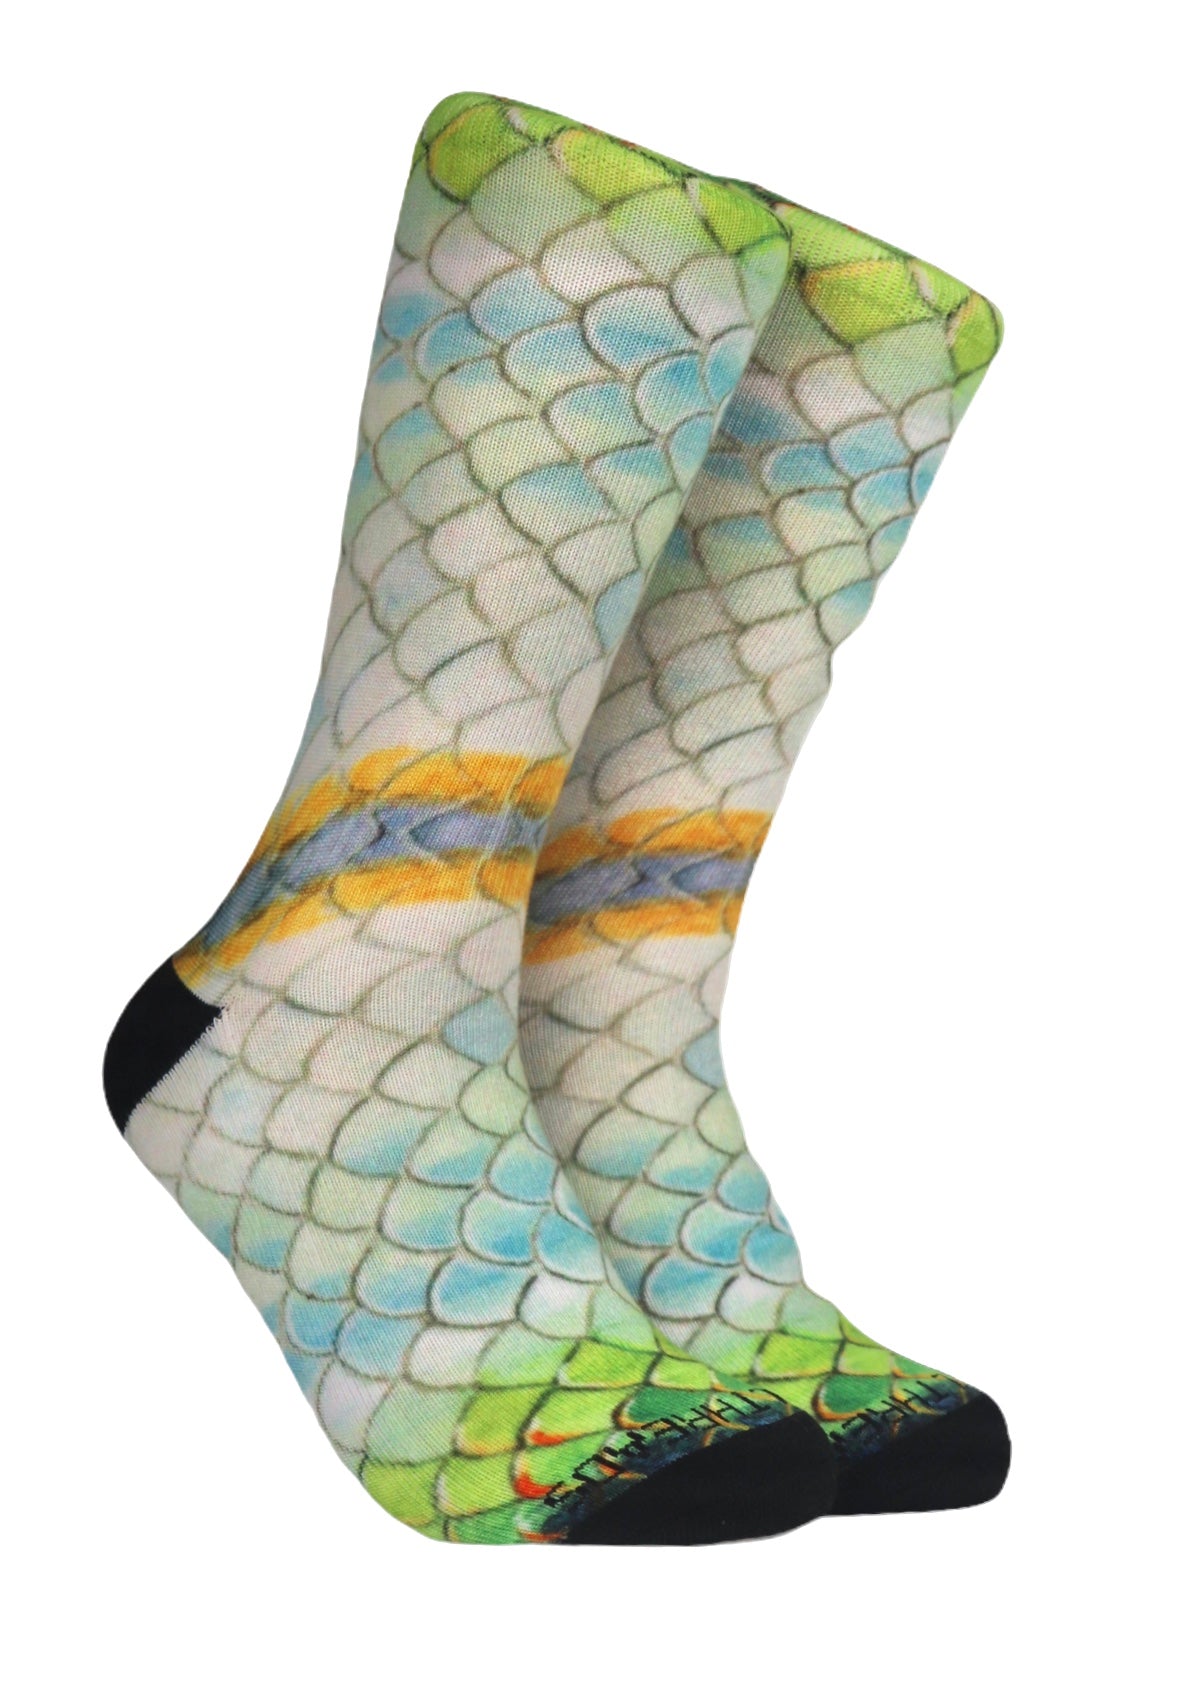 Tarpon Socks - Fish Patterned Clothing- Gifts for Anglers – Reel Threads